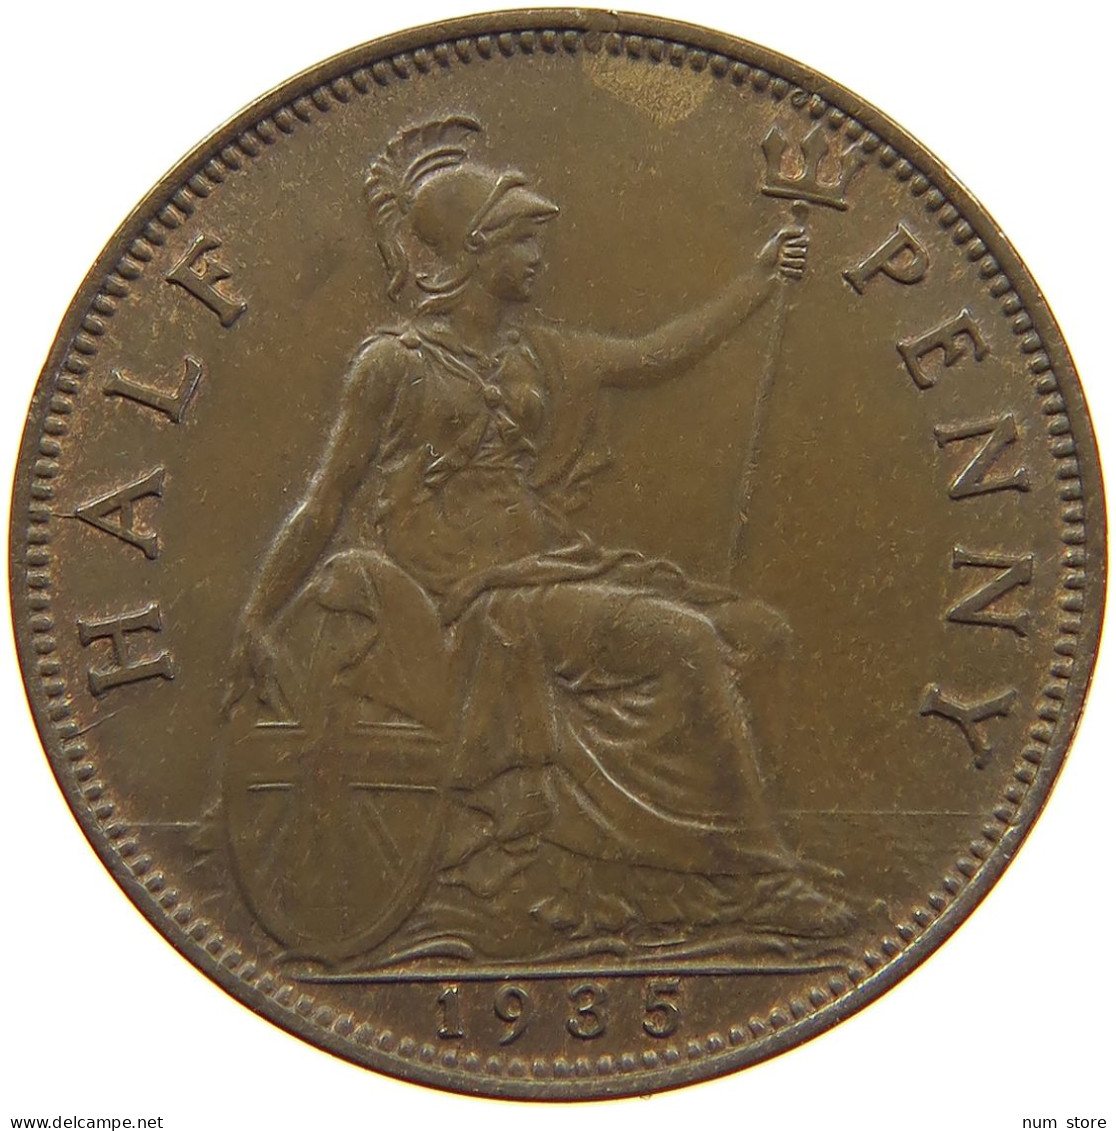 GREAT BRITAIN HALFPENNY 1935 George V. (1910-1936) #c015 0285 - C. 1/2 Penny